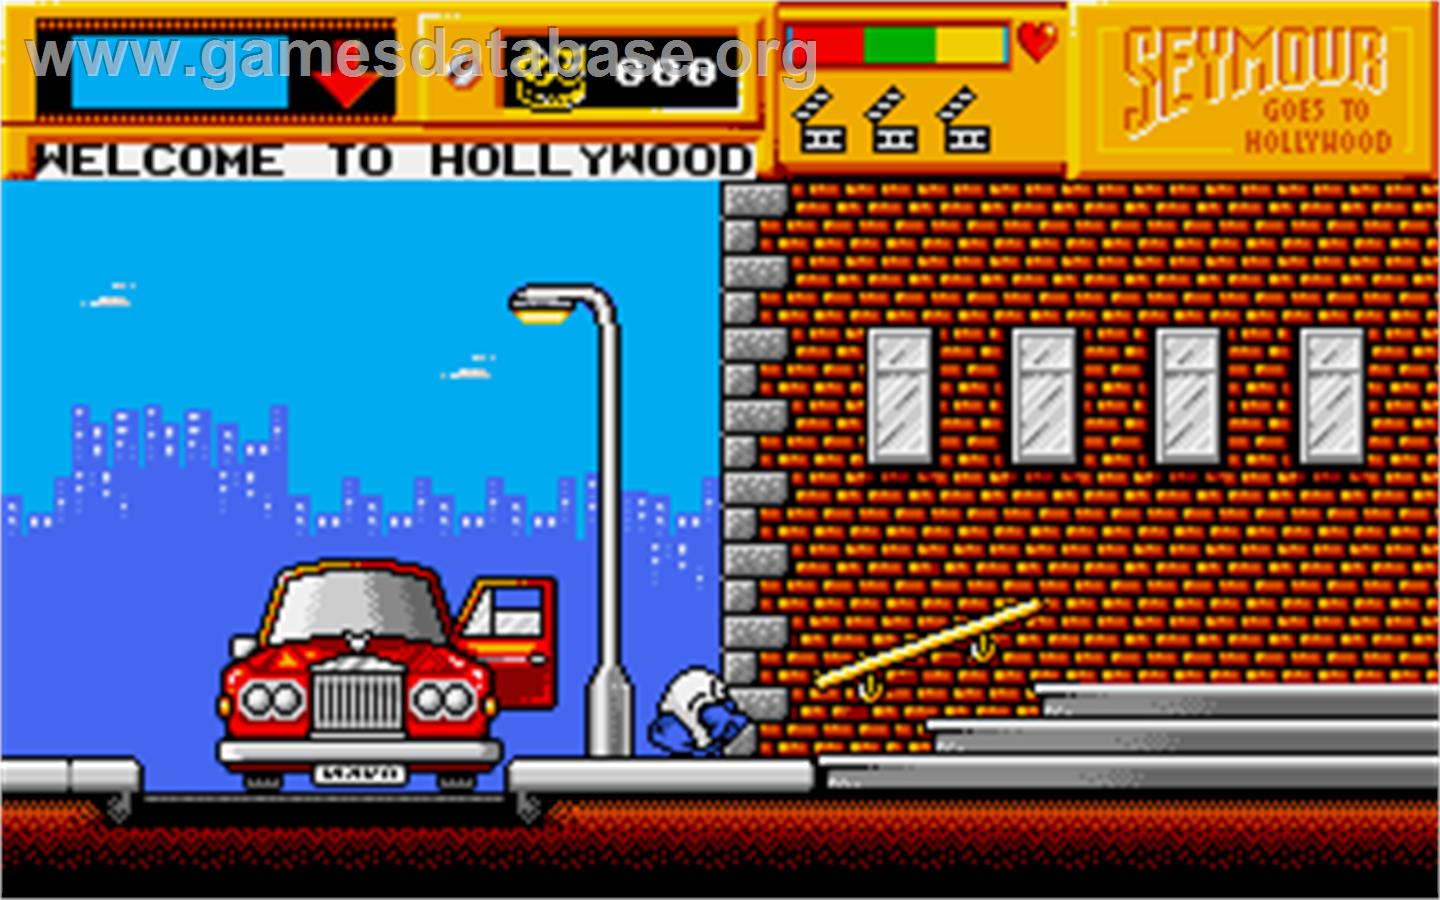 Seymour Goes to Hollywood - Atari ST - Artwork - In Game